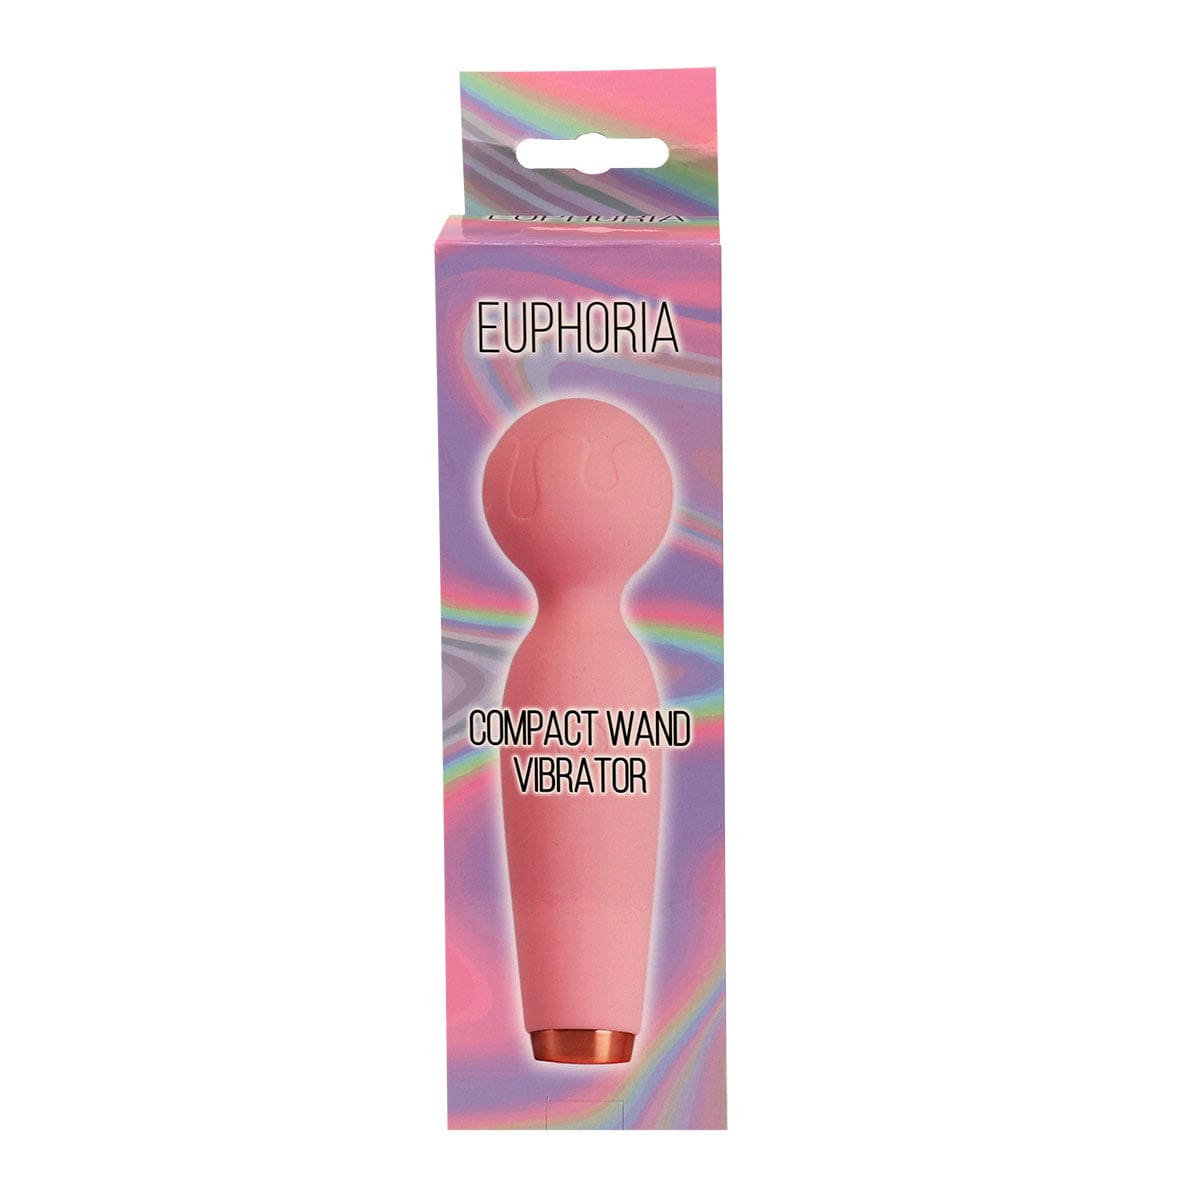 Wholesale Compact Wand Vibrator For Women